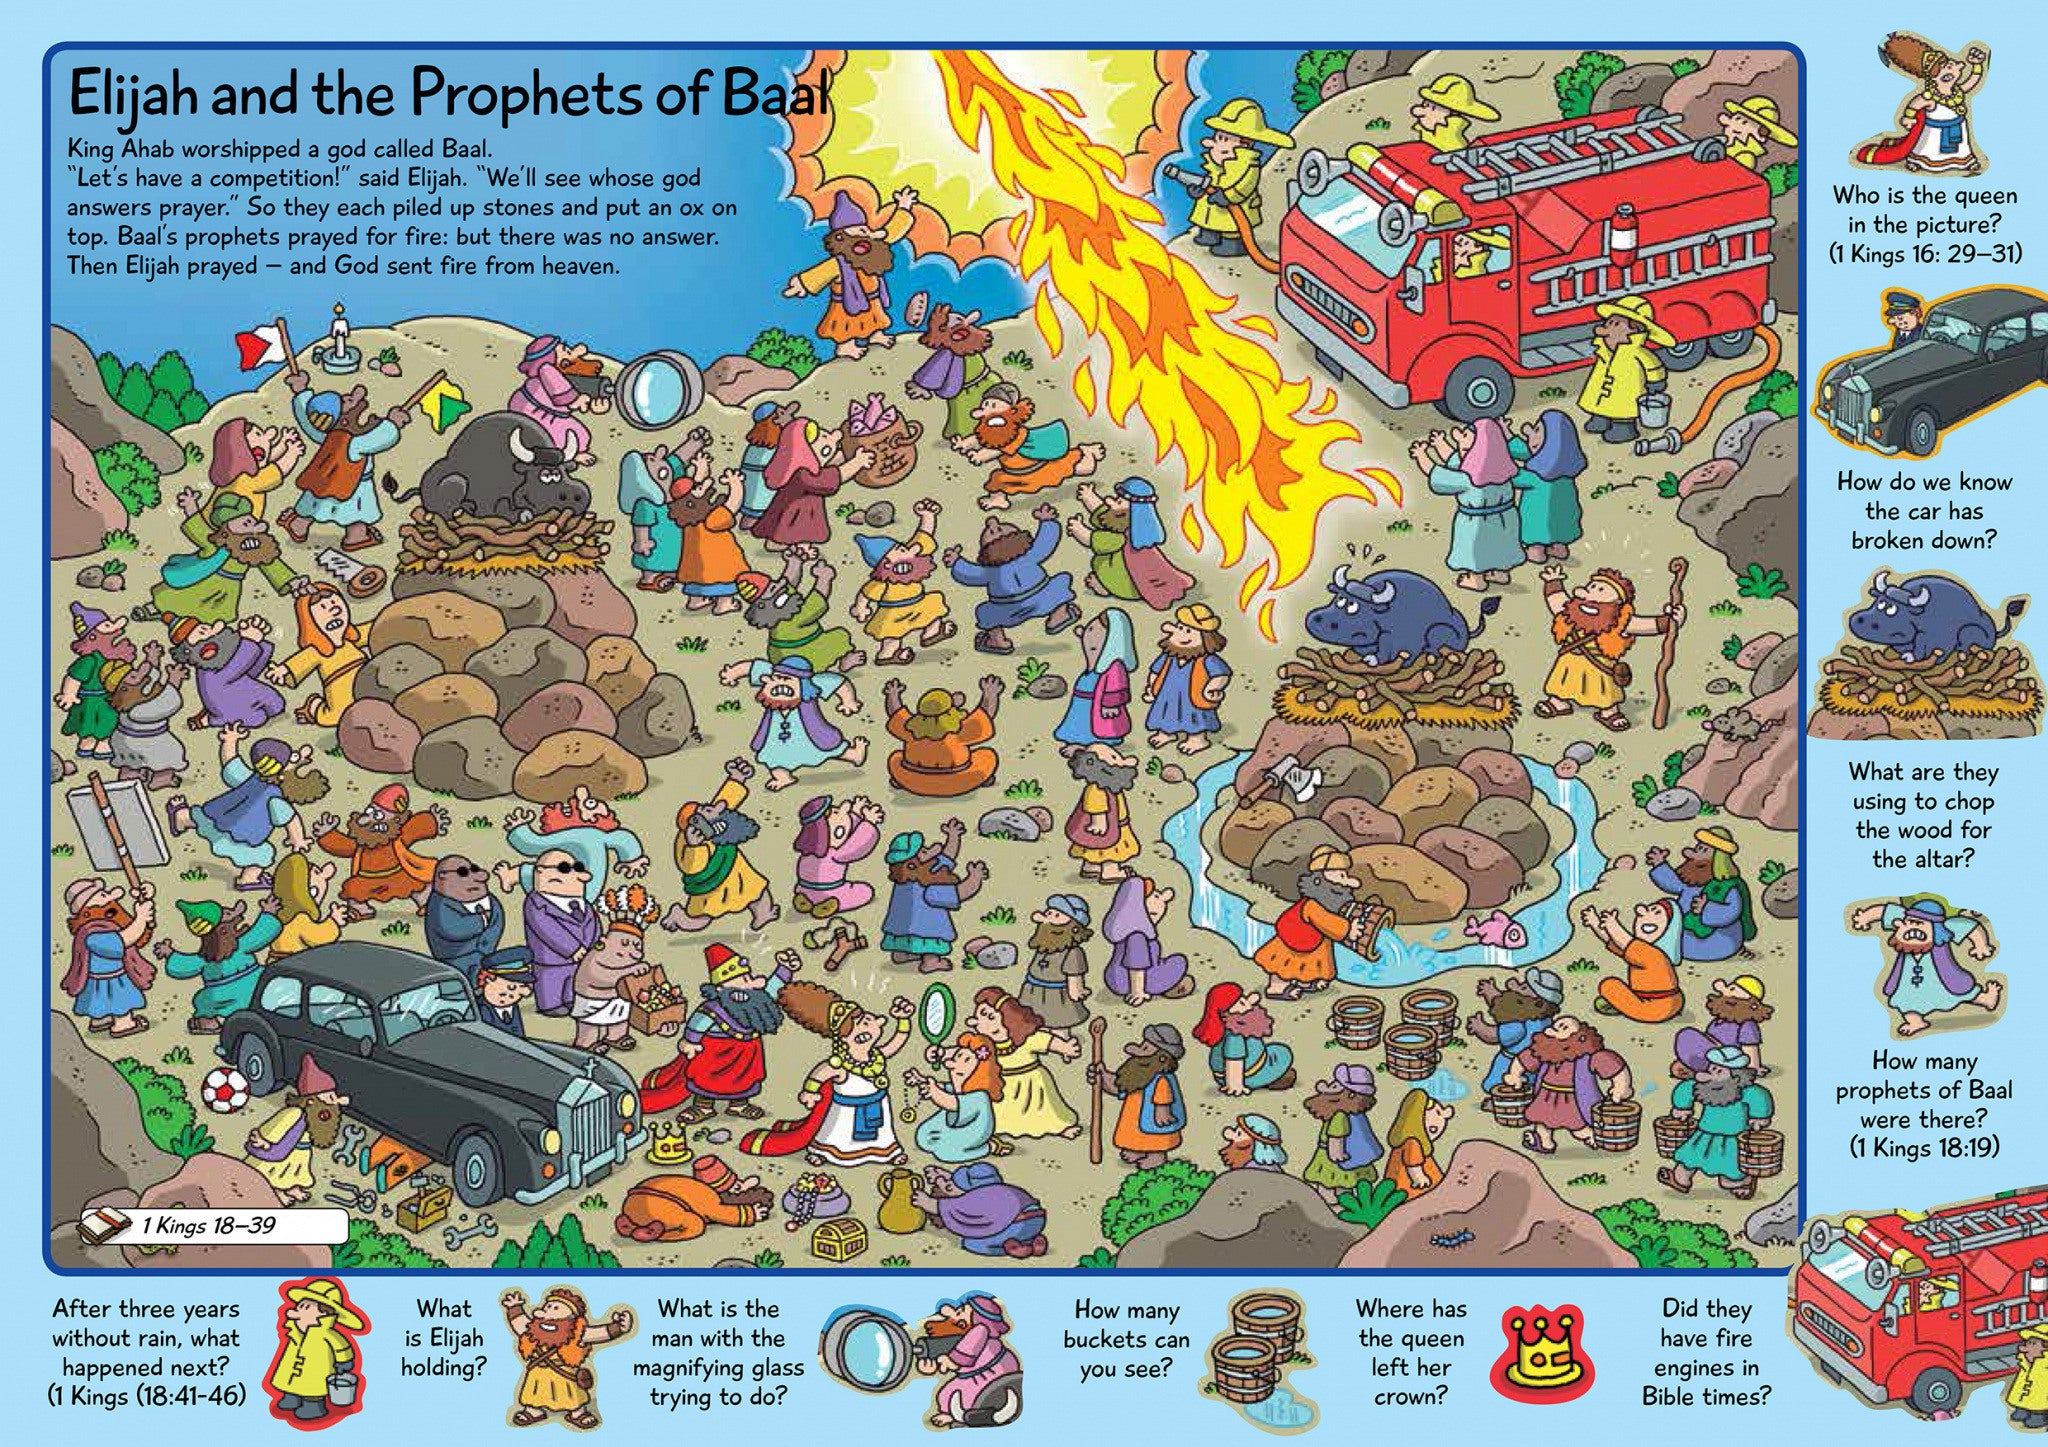 Image of Bible Stories Gone Even More Crazy! other